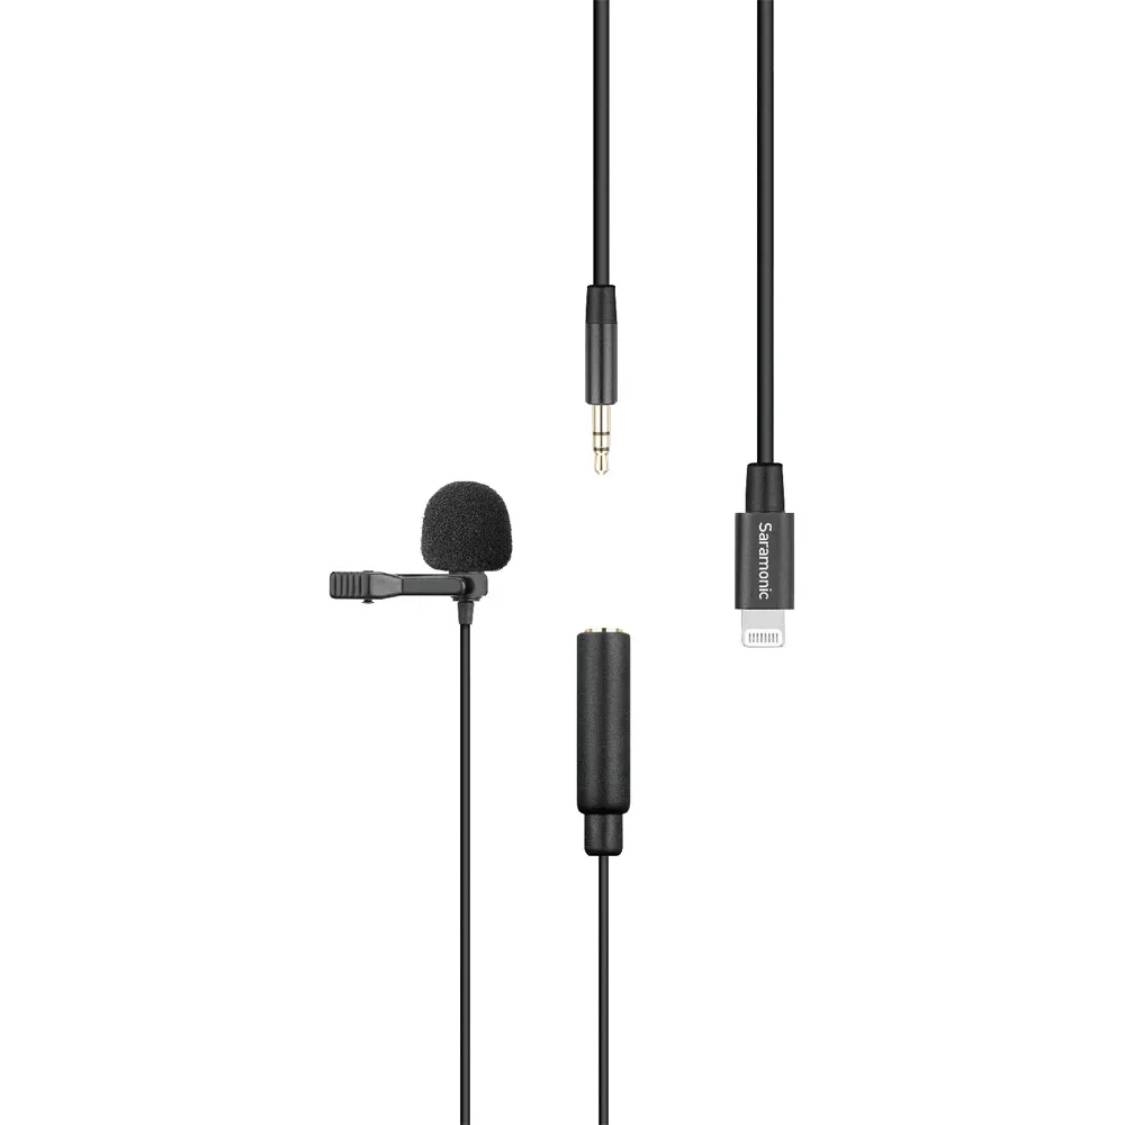 Saramonic LavMicro U1A Lavalier Microphone with Detachable Lightning Connector for New iPhone